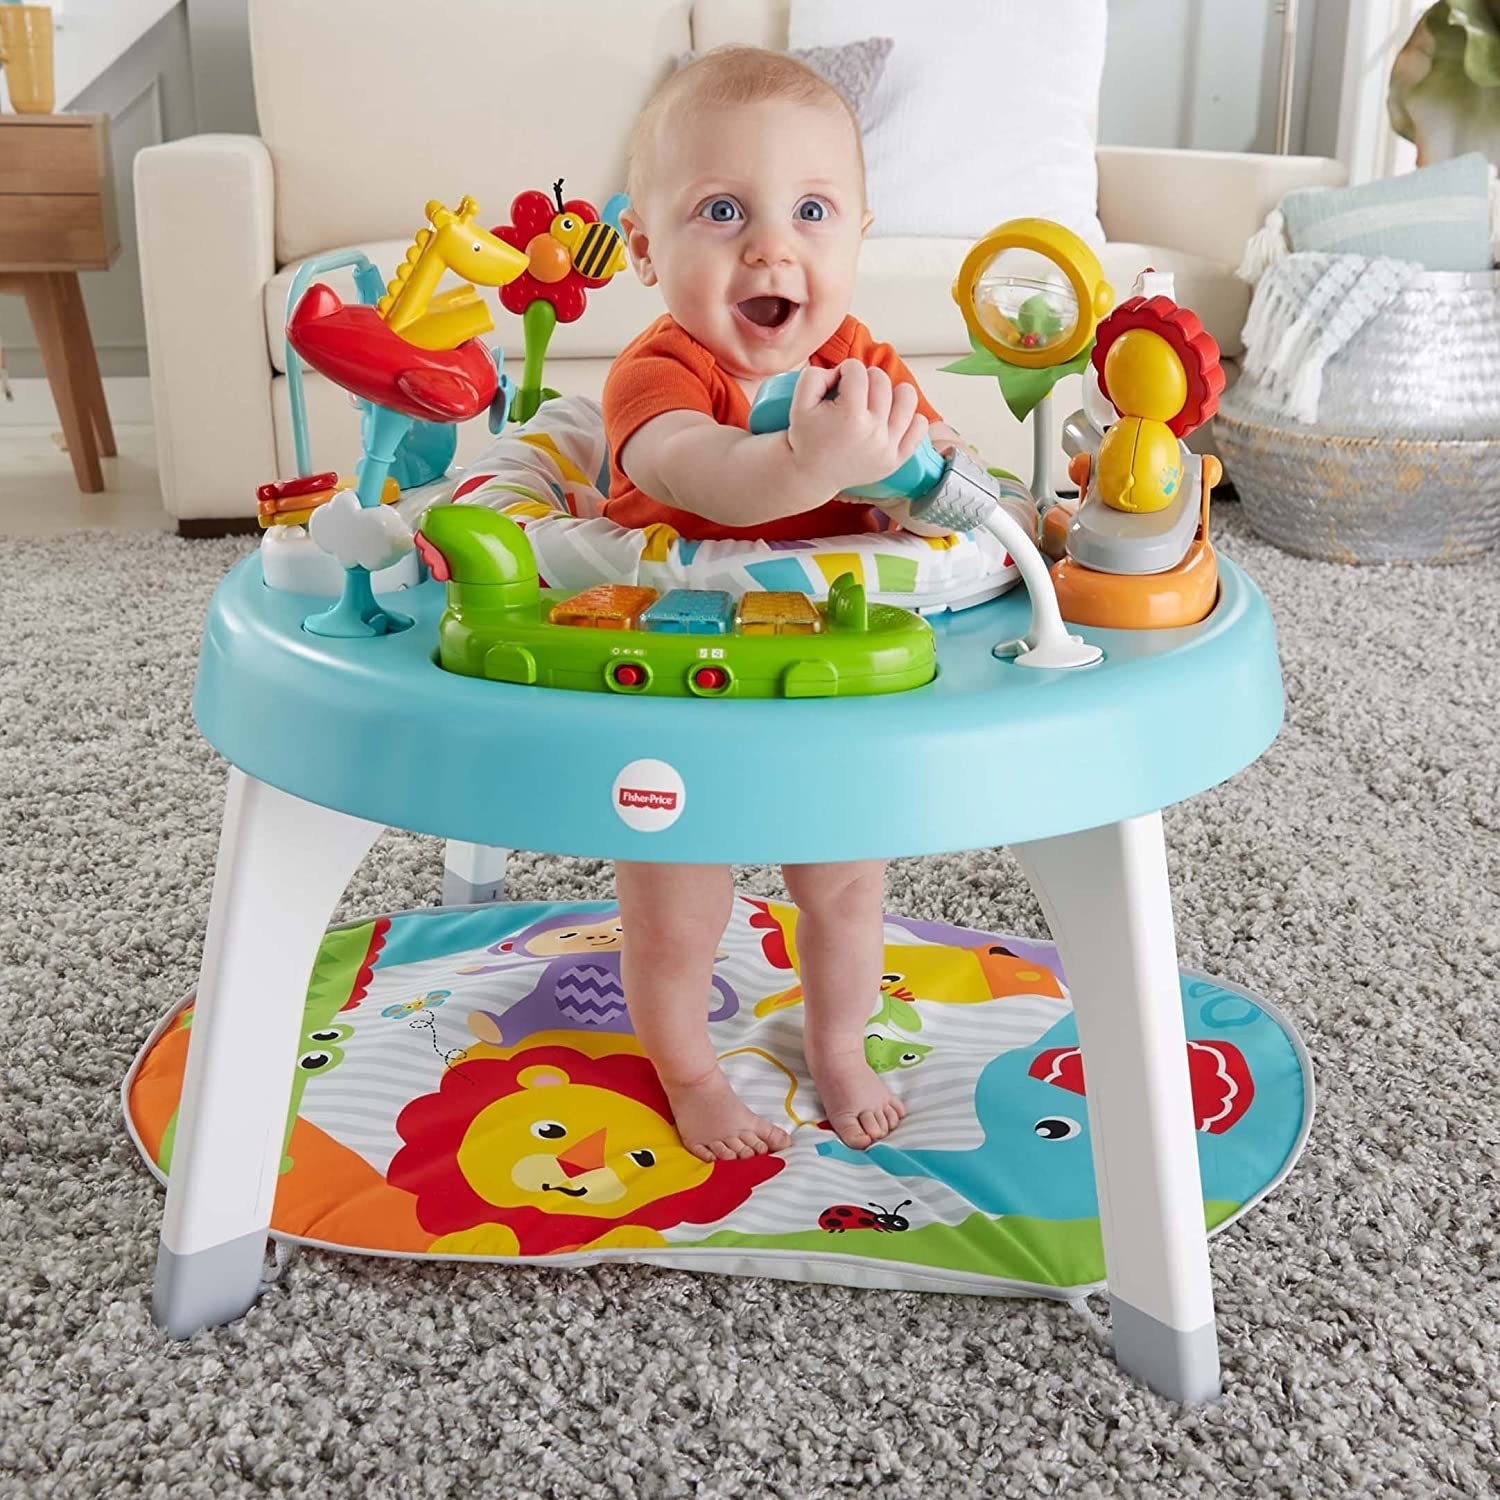 a baby standing inside the play center surrounded by toys